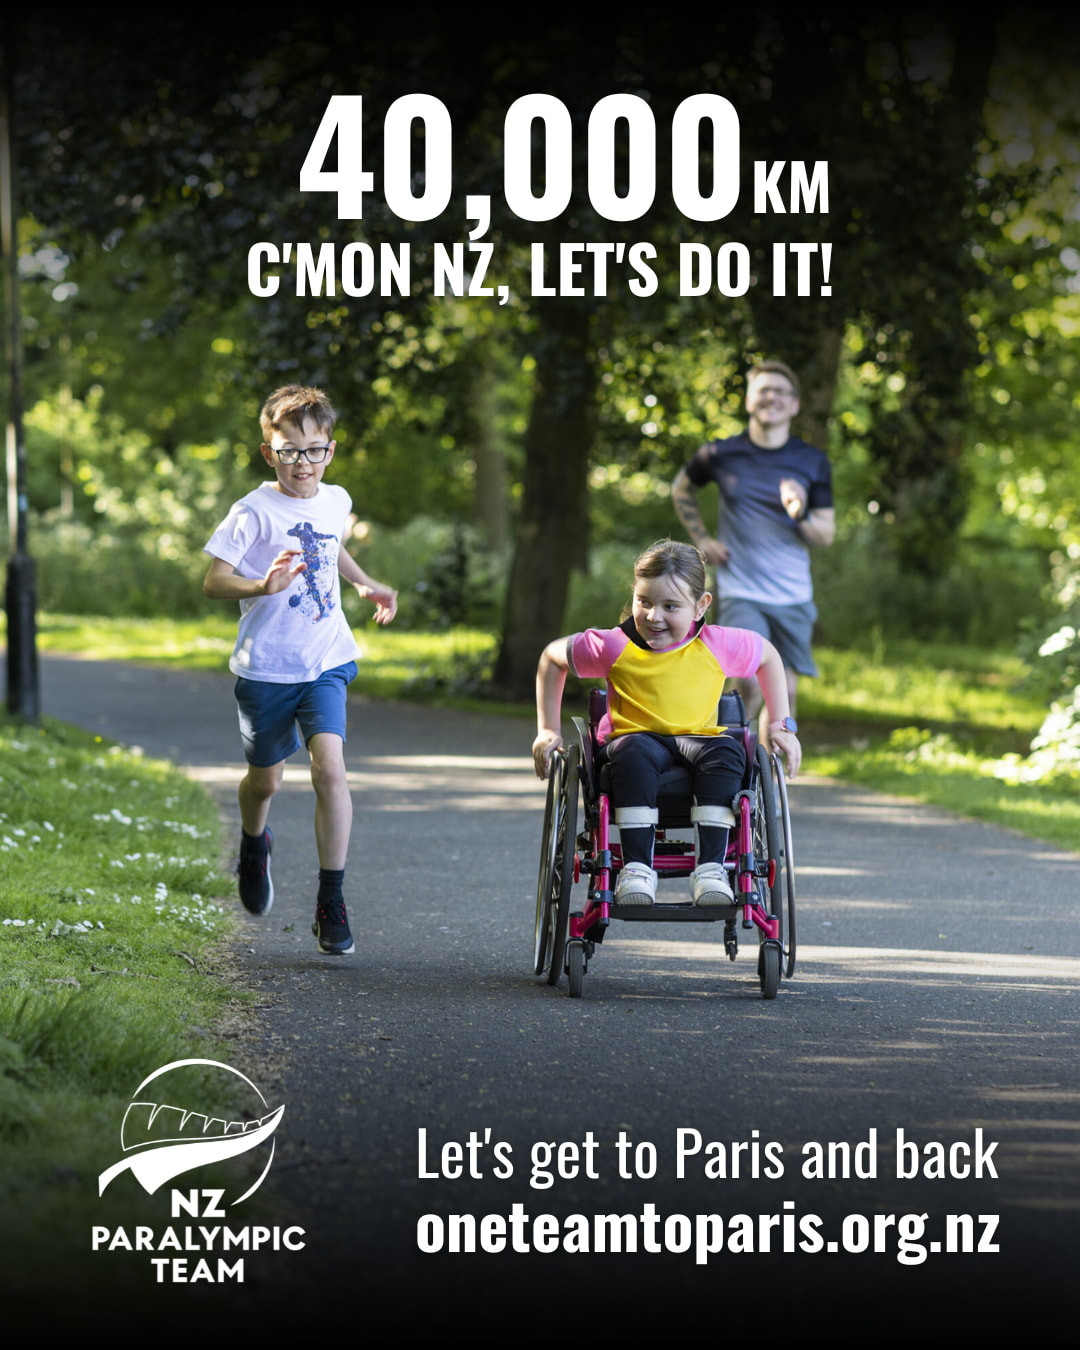 Paralympics New Zealand wants residents to collectively record 40,000km of exercise to boost Paris 2024 preparations ©Paralympics New Zealand